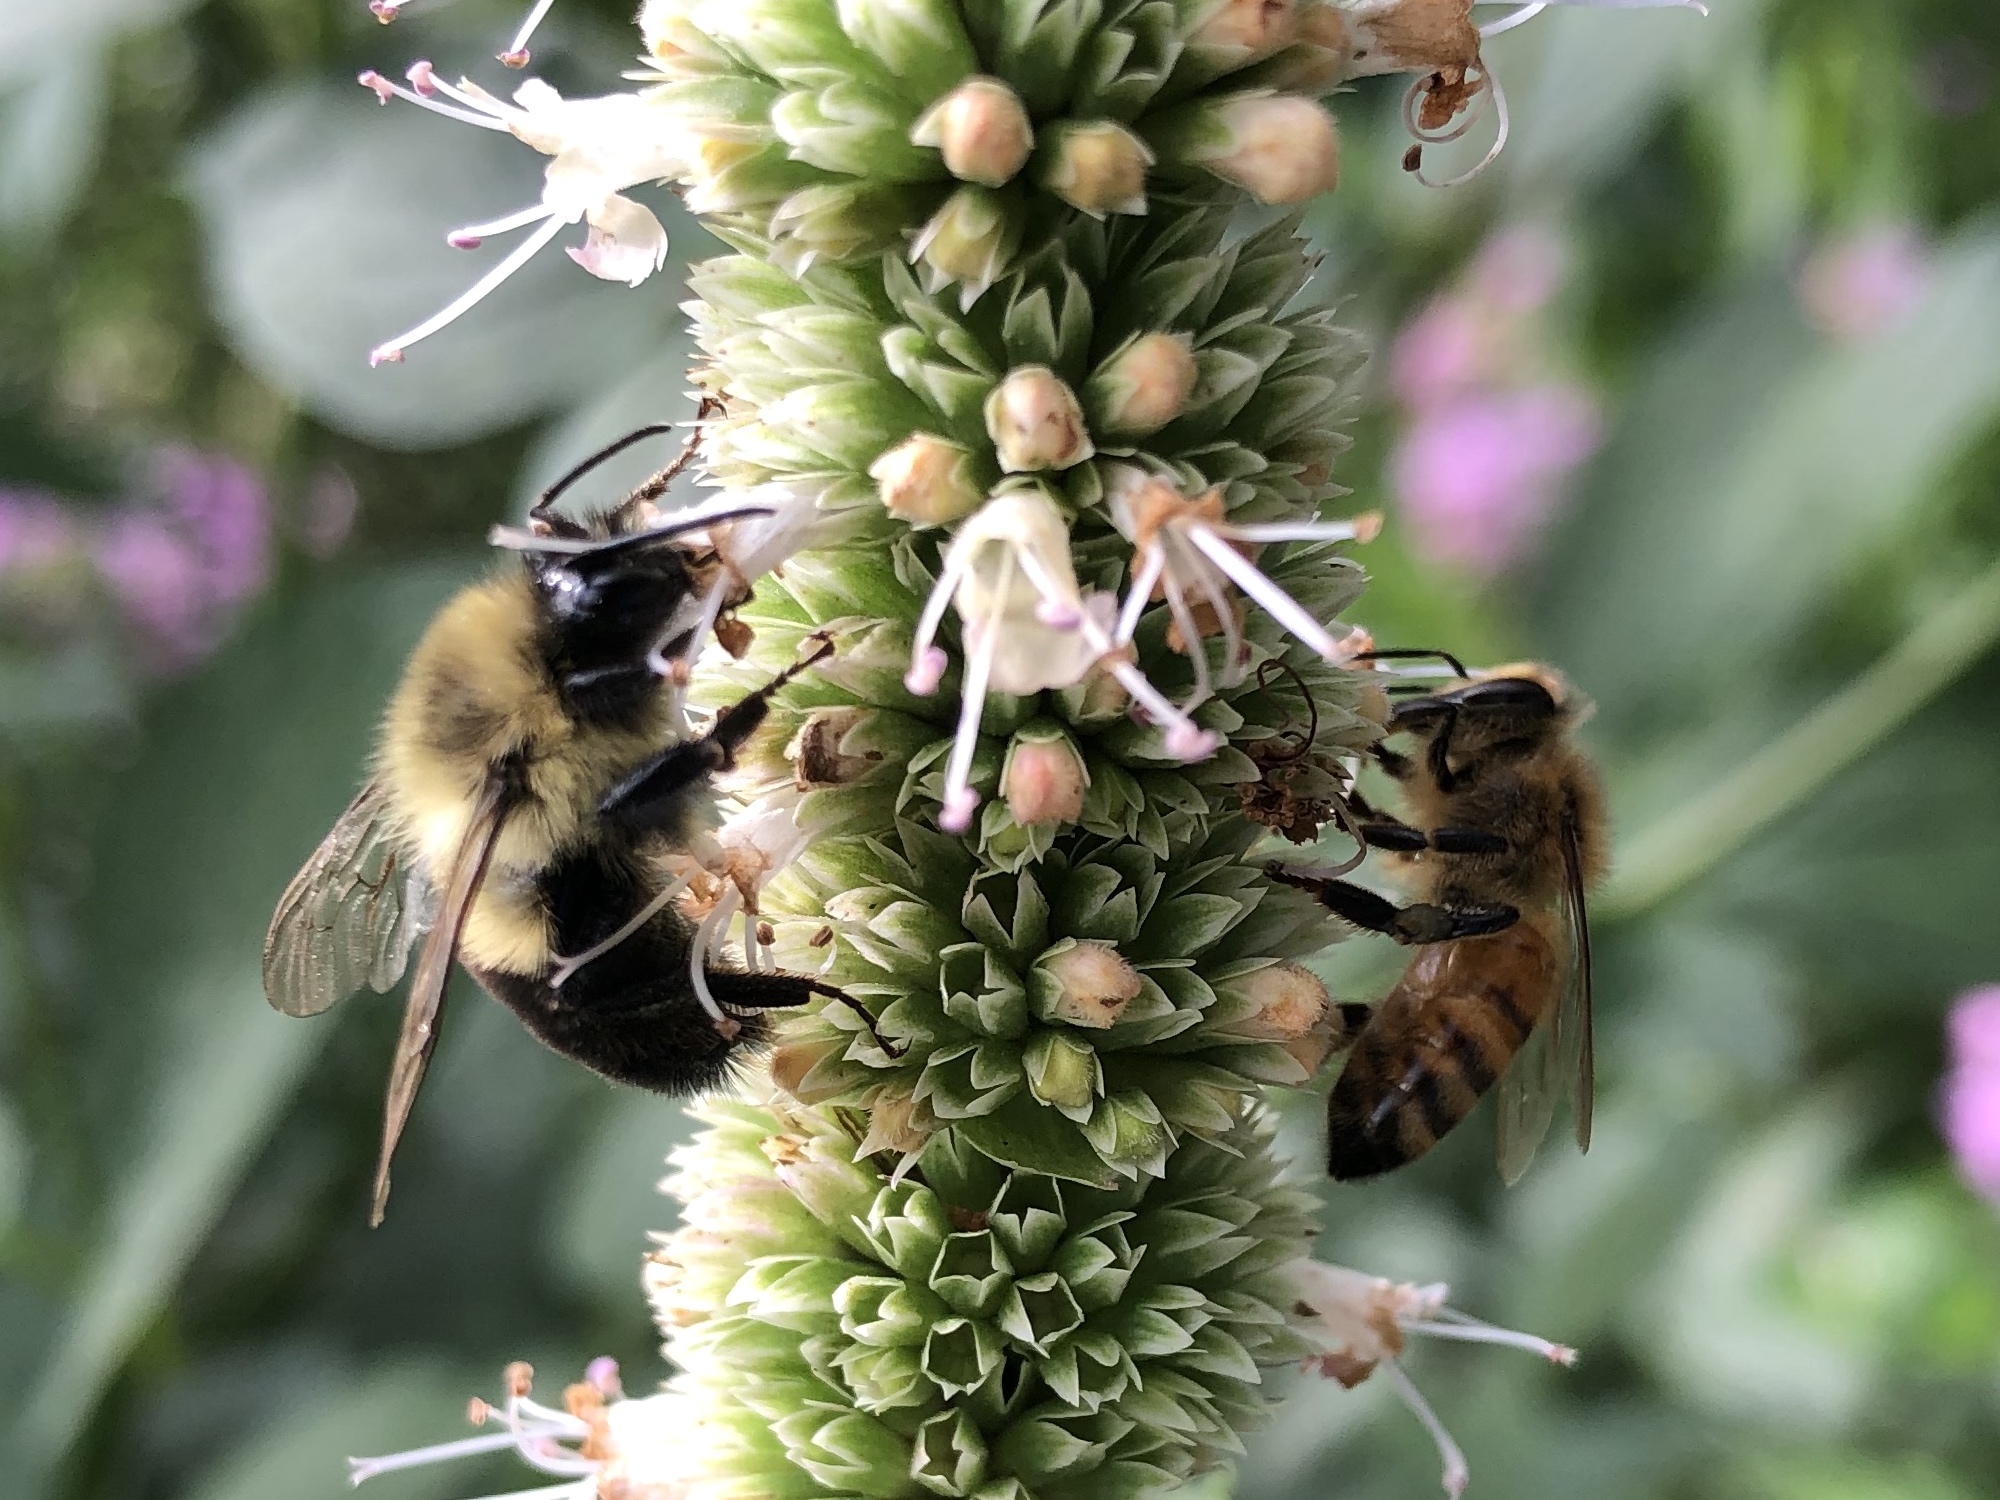 Bees on Giant Hyssop on August 22, 2020.